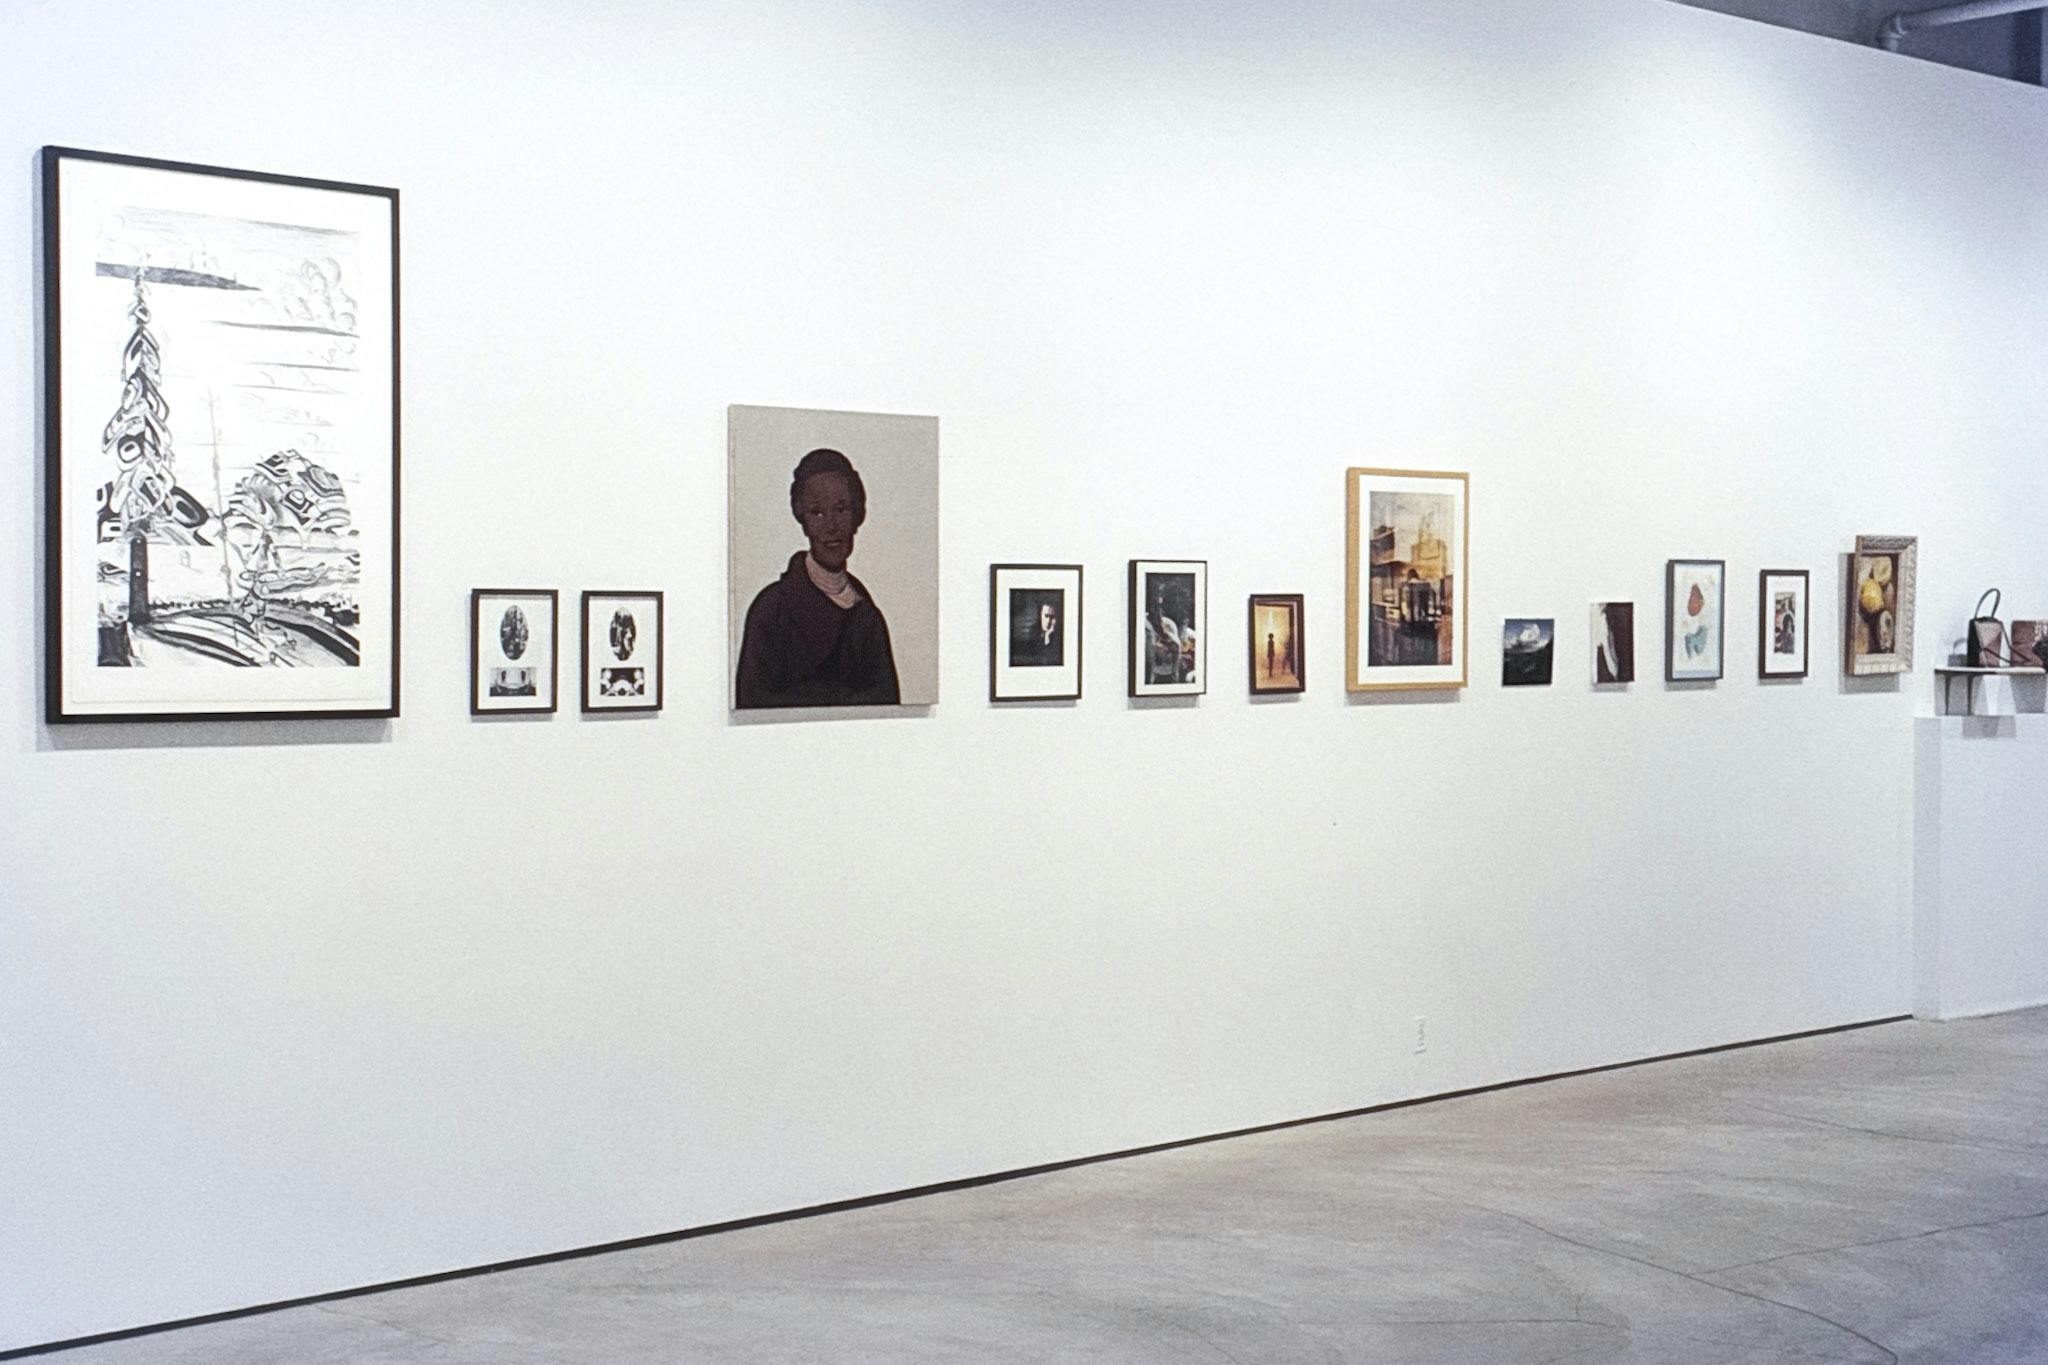 14 artworks on a gallery wall. The bottom edges of the works are mounted at the same level , but their height and width varies. The largest work, on the right, is a Salish landscape illustration.